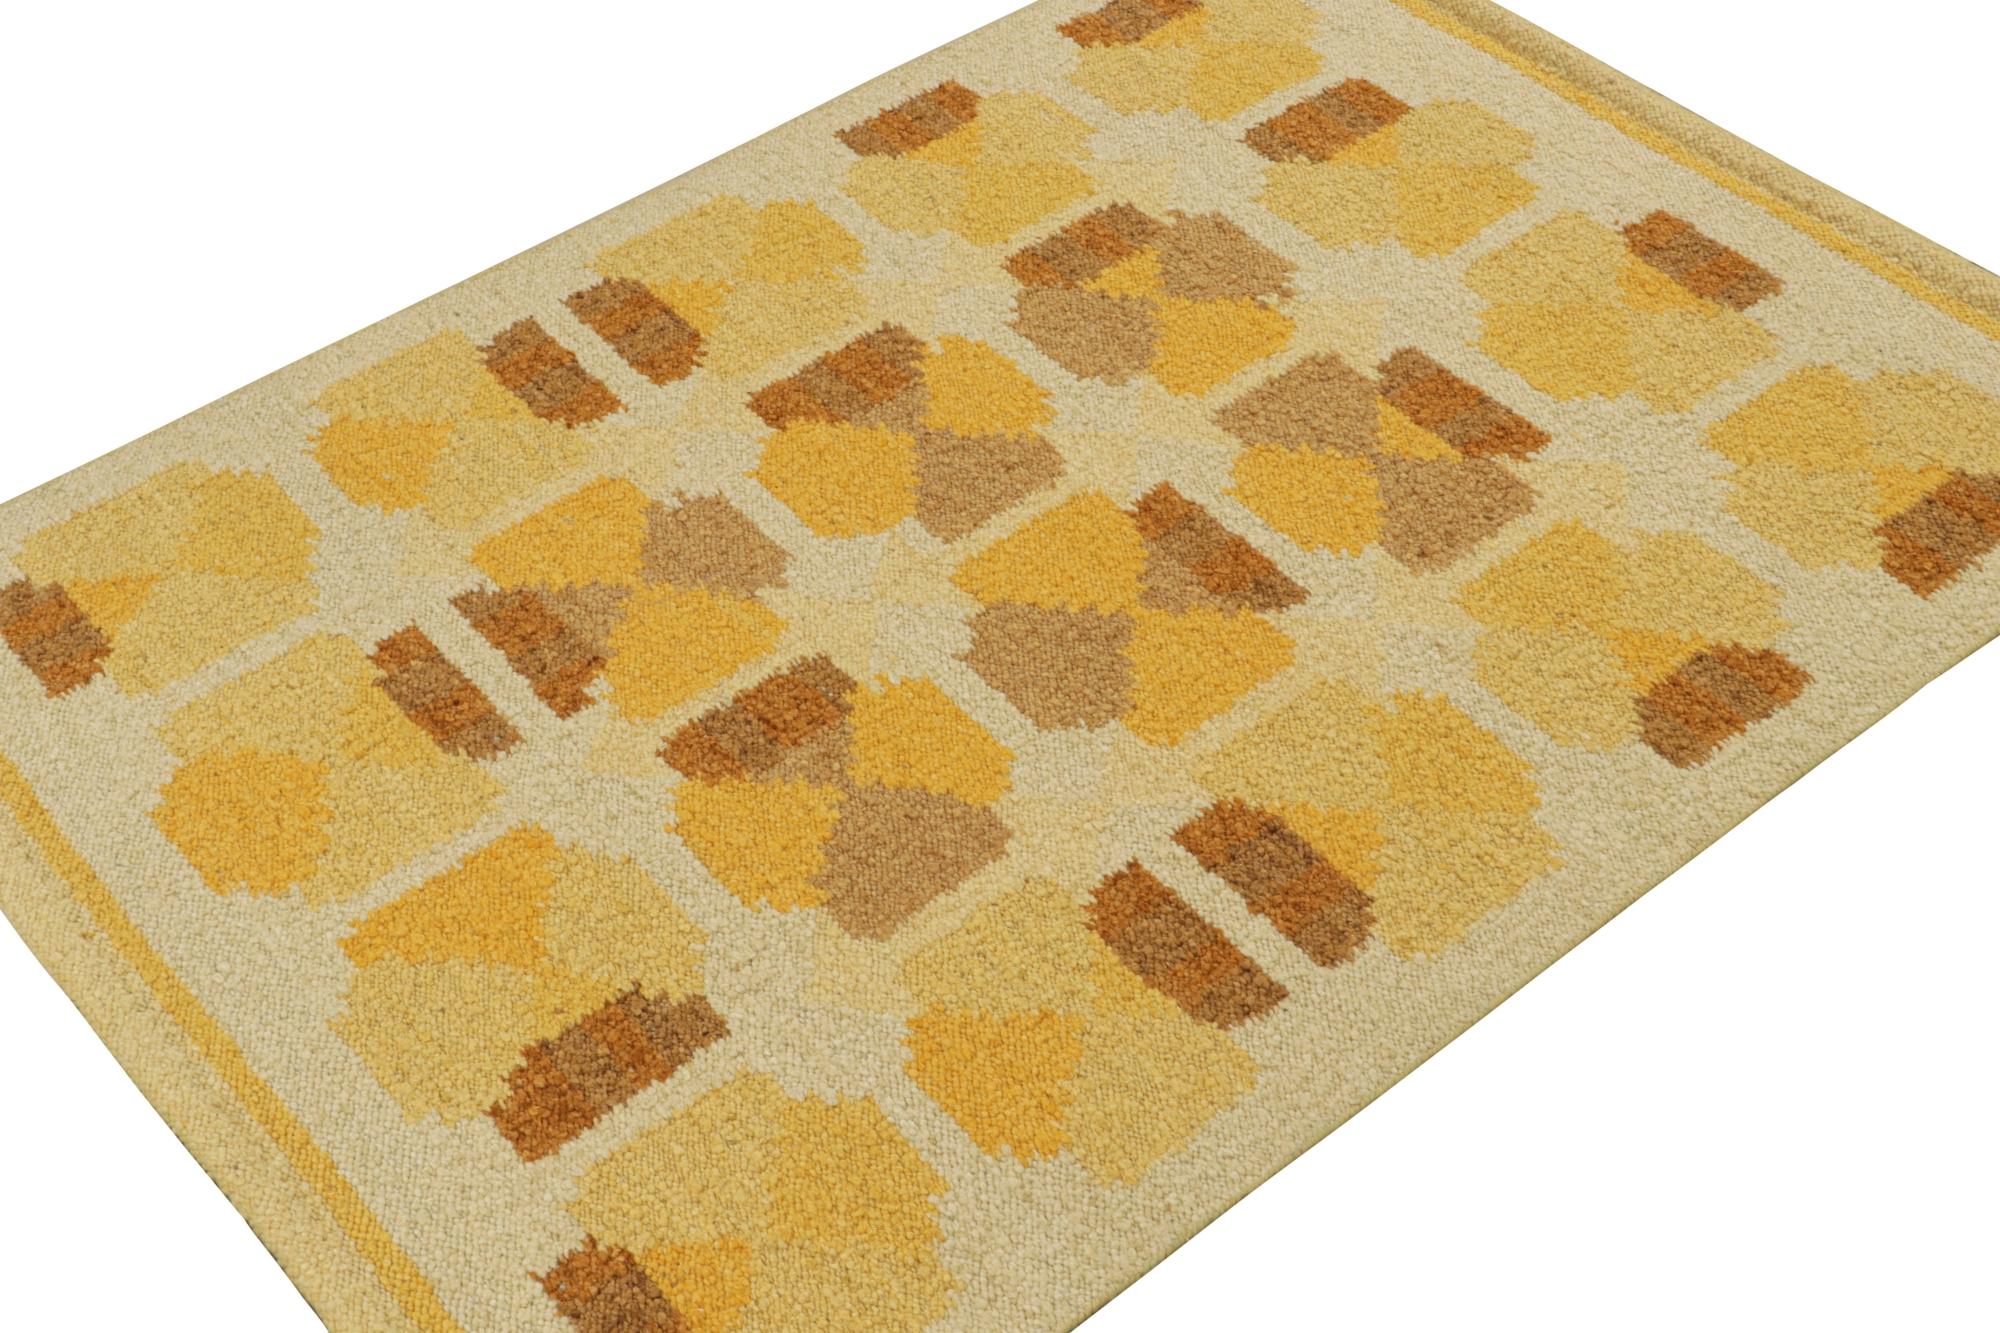 Indian Rug & Kilim’s Scandinavian Style Kilim with Gold-Brown Geometric Patterns For Sale